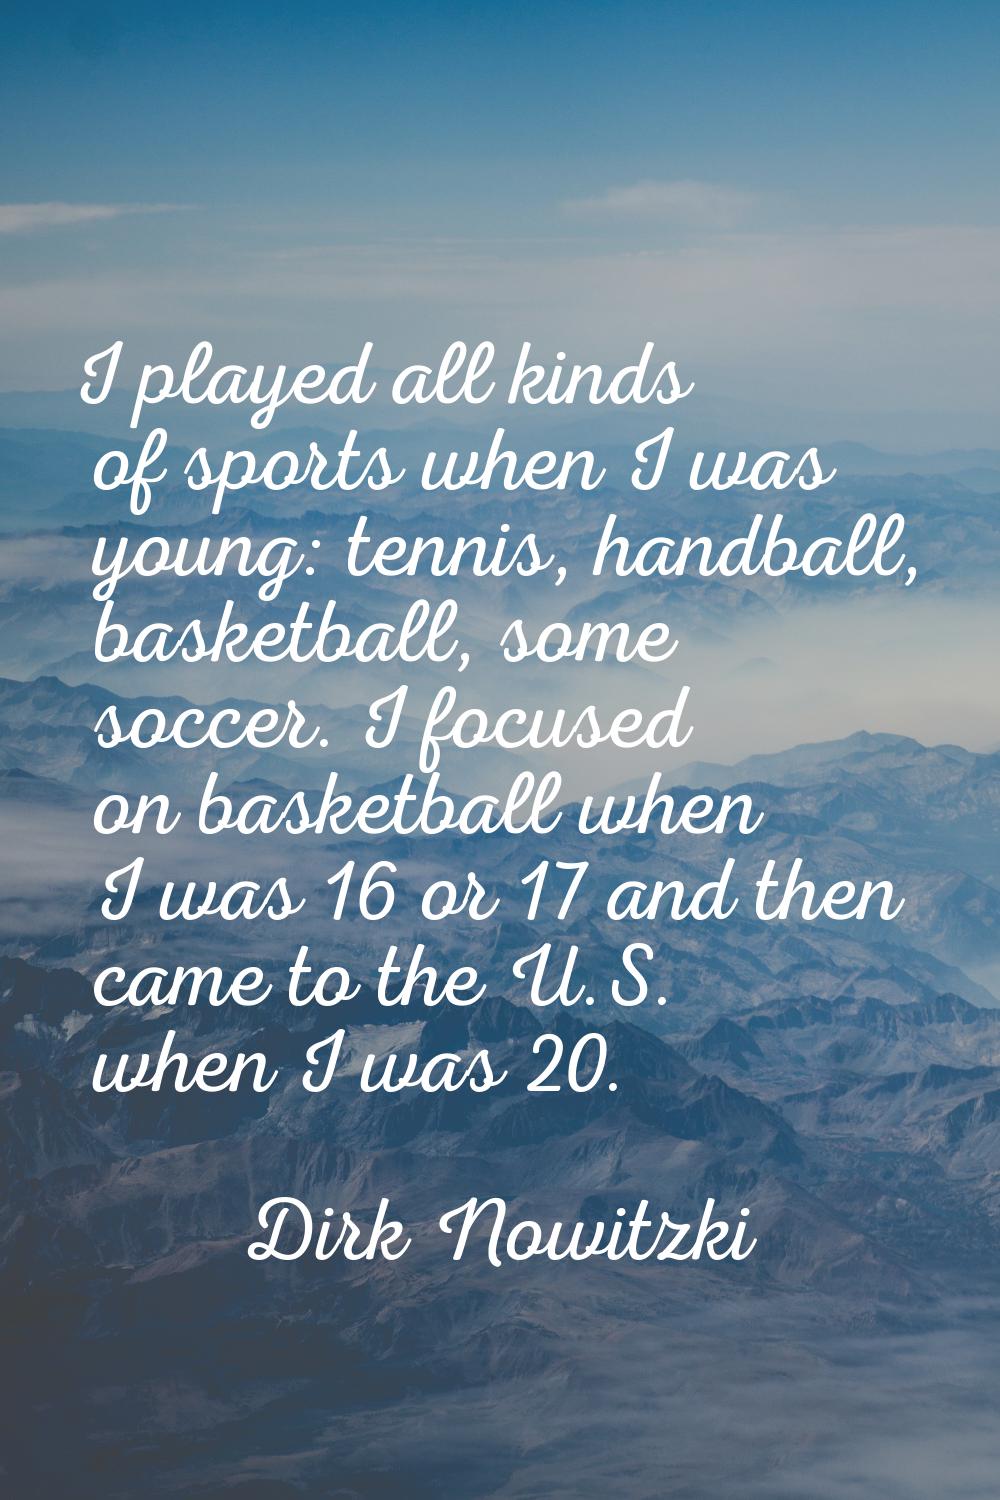 I played all kinds of sports when I was young: tennis, handball, basketball, some soccer. I focused